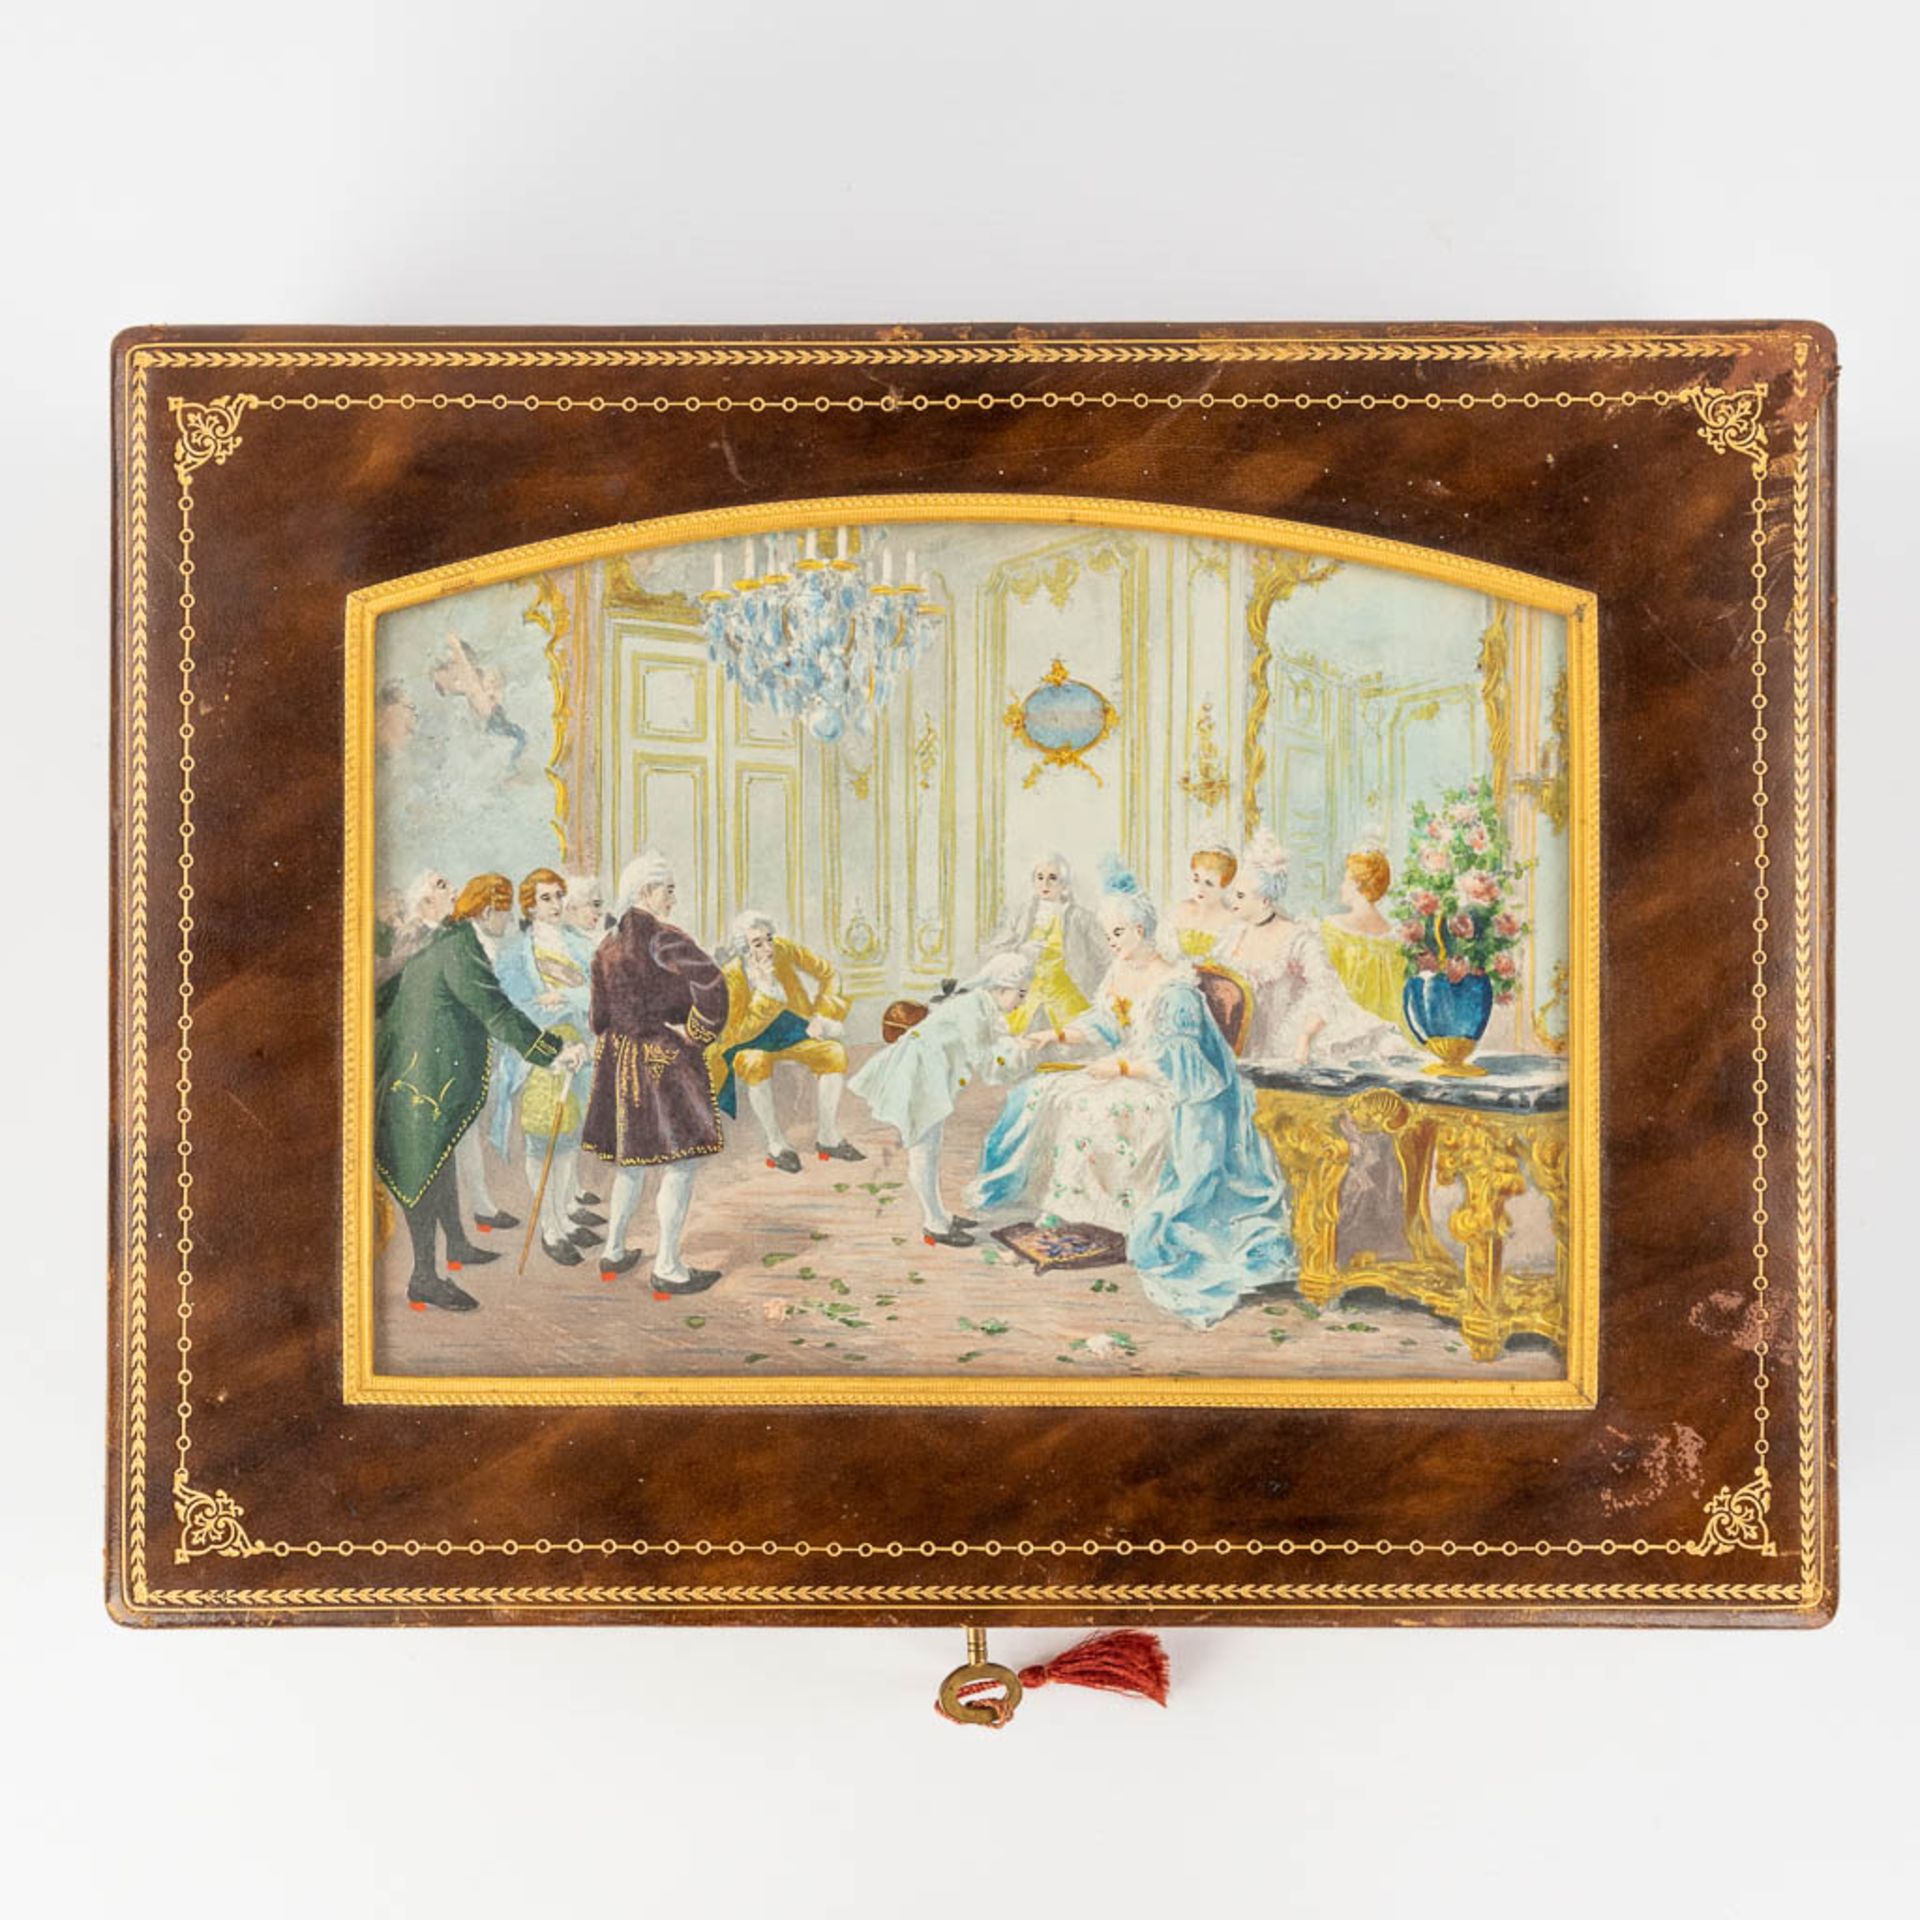 A decorative jewellery box with hand-painted decor. (D:28 x W:36,5 x H:11 cm) - Image 5 of 15